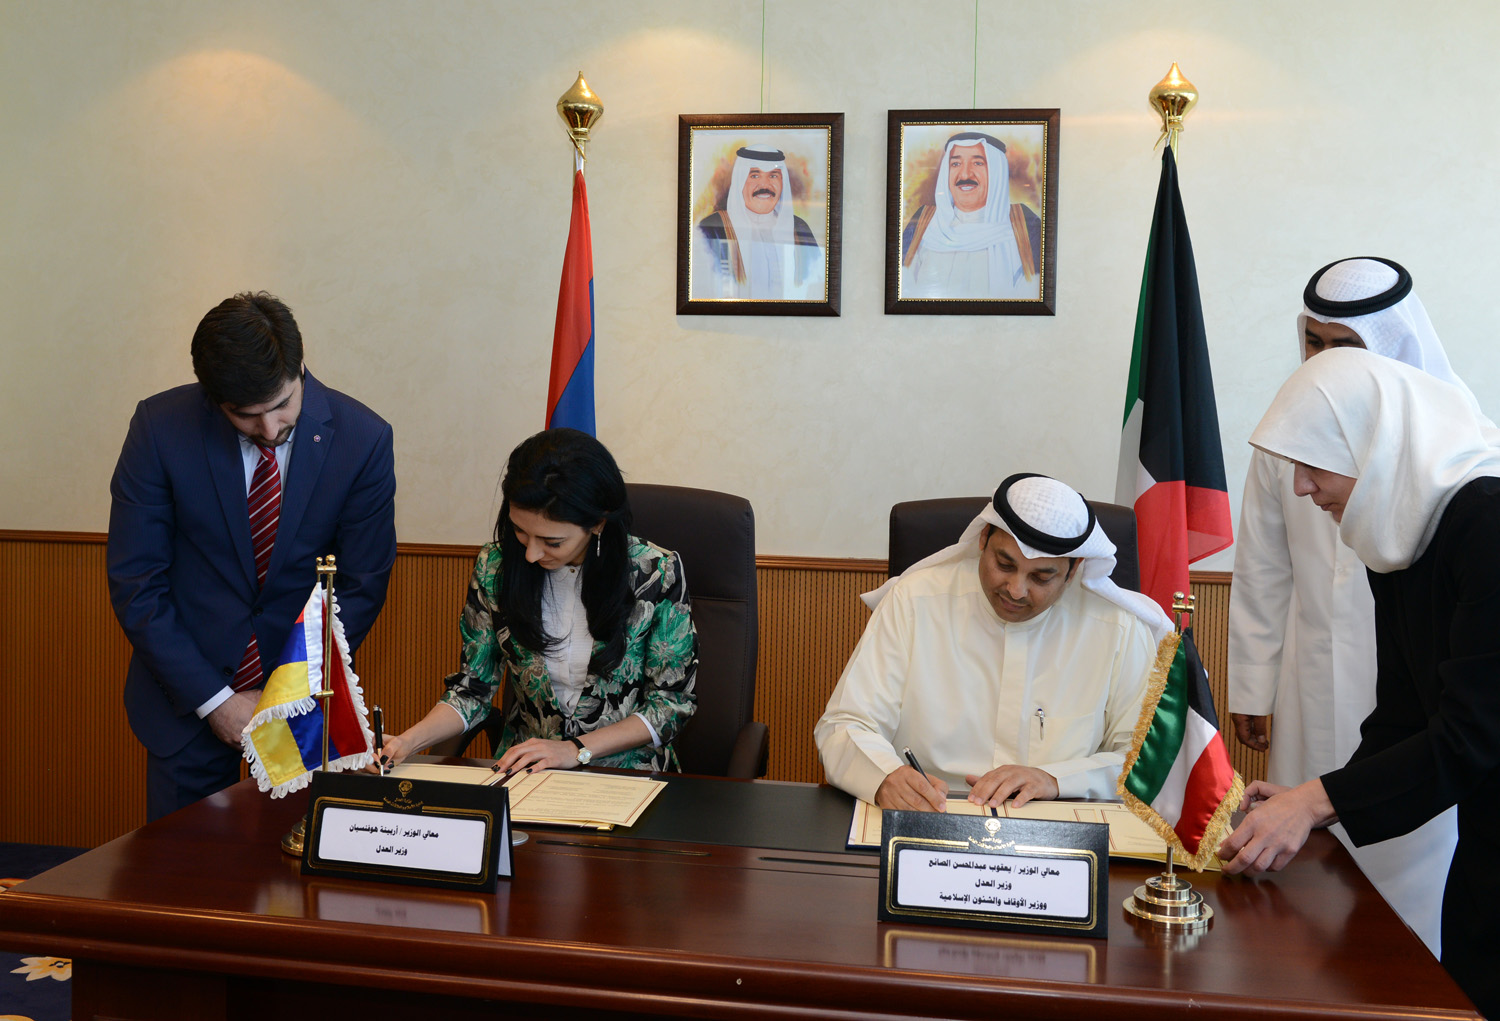 Minister of Justice and Minister of Awqaf and Islamic Affairs Yaqoub with Armenian Minister of Justice Arpine Hovhannisyan during the Signing ceremony